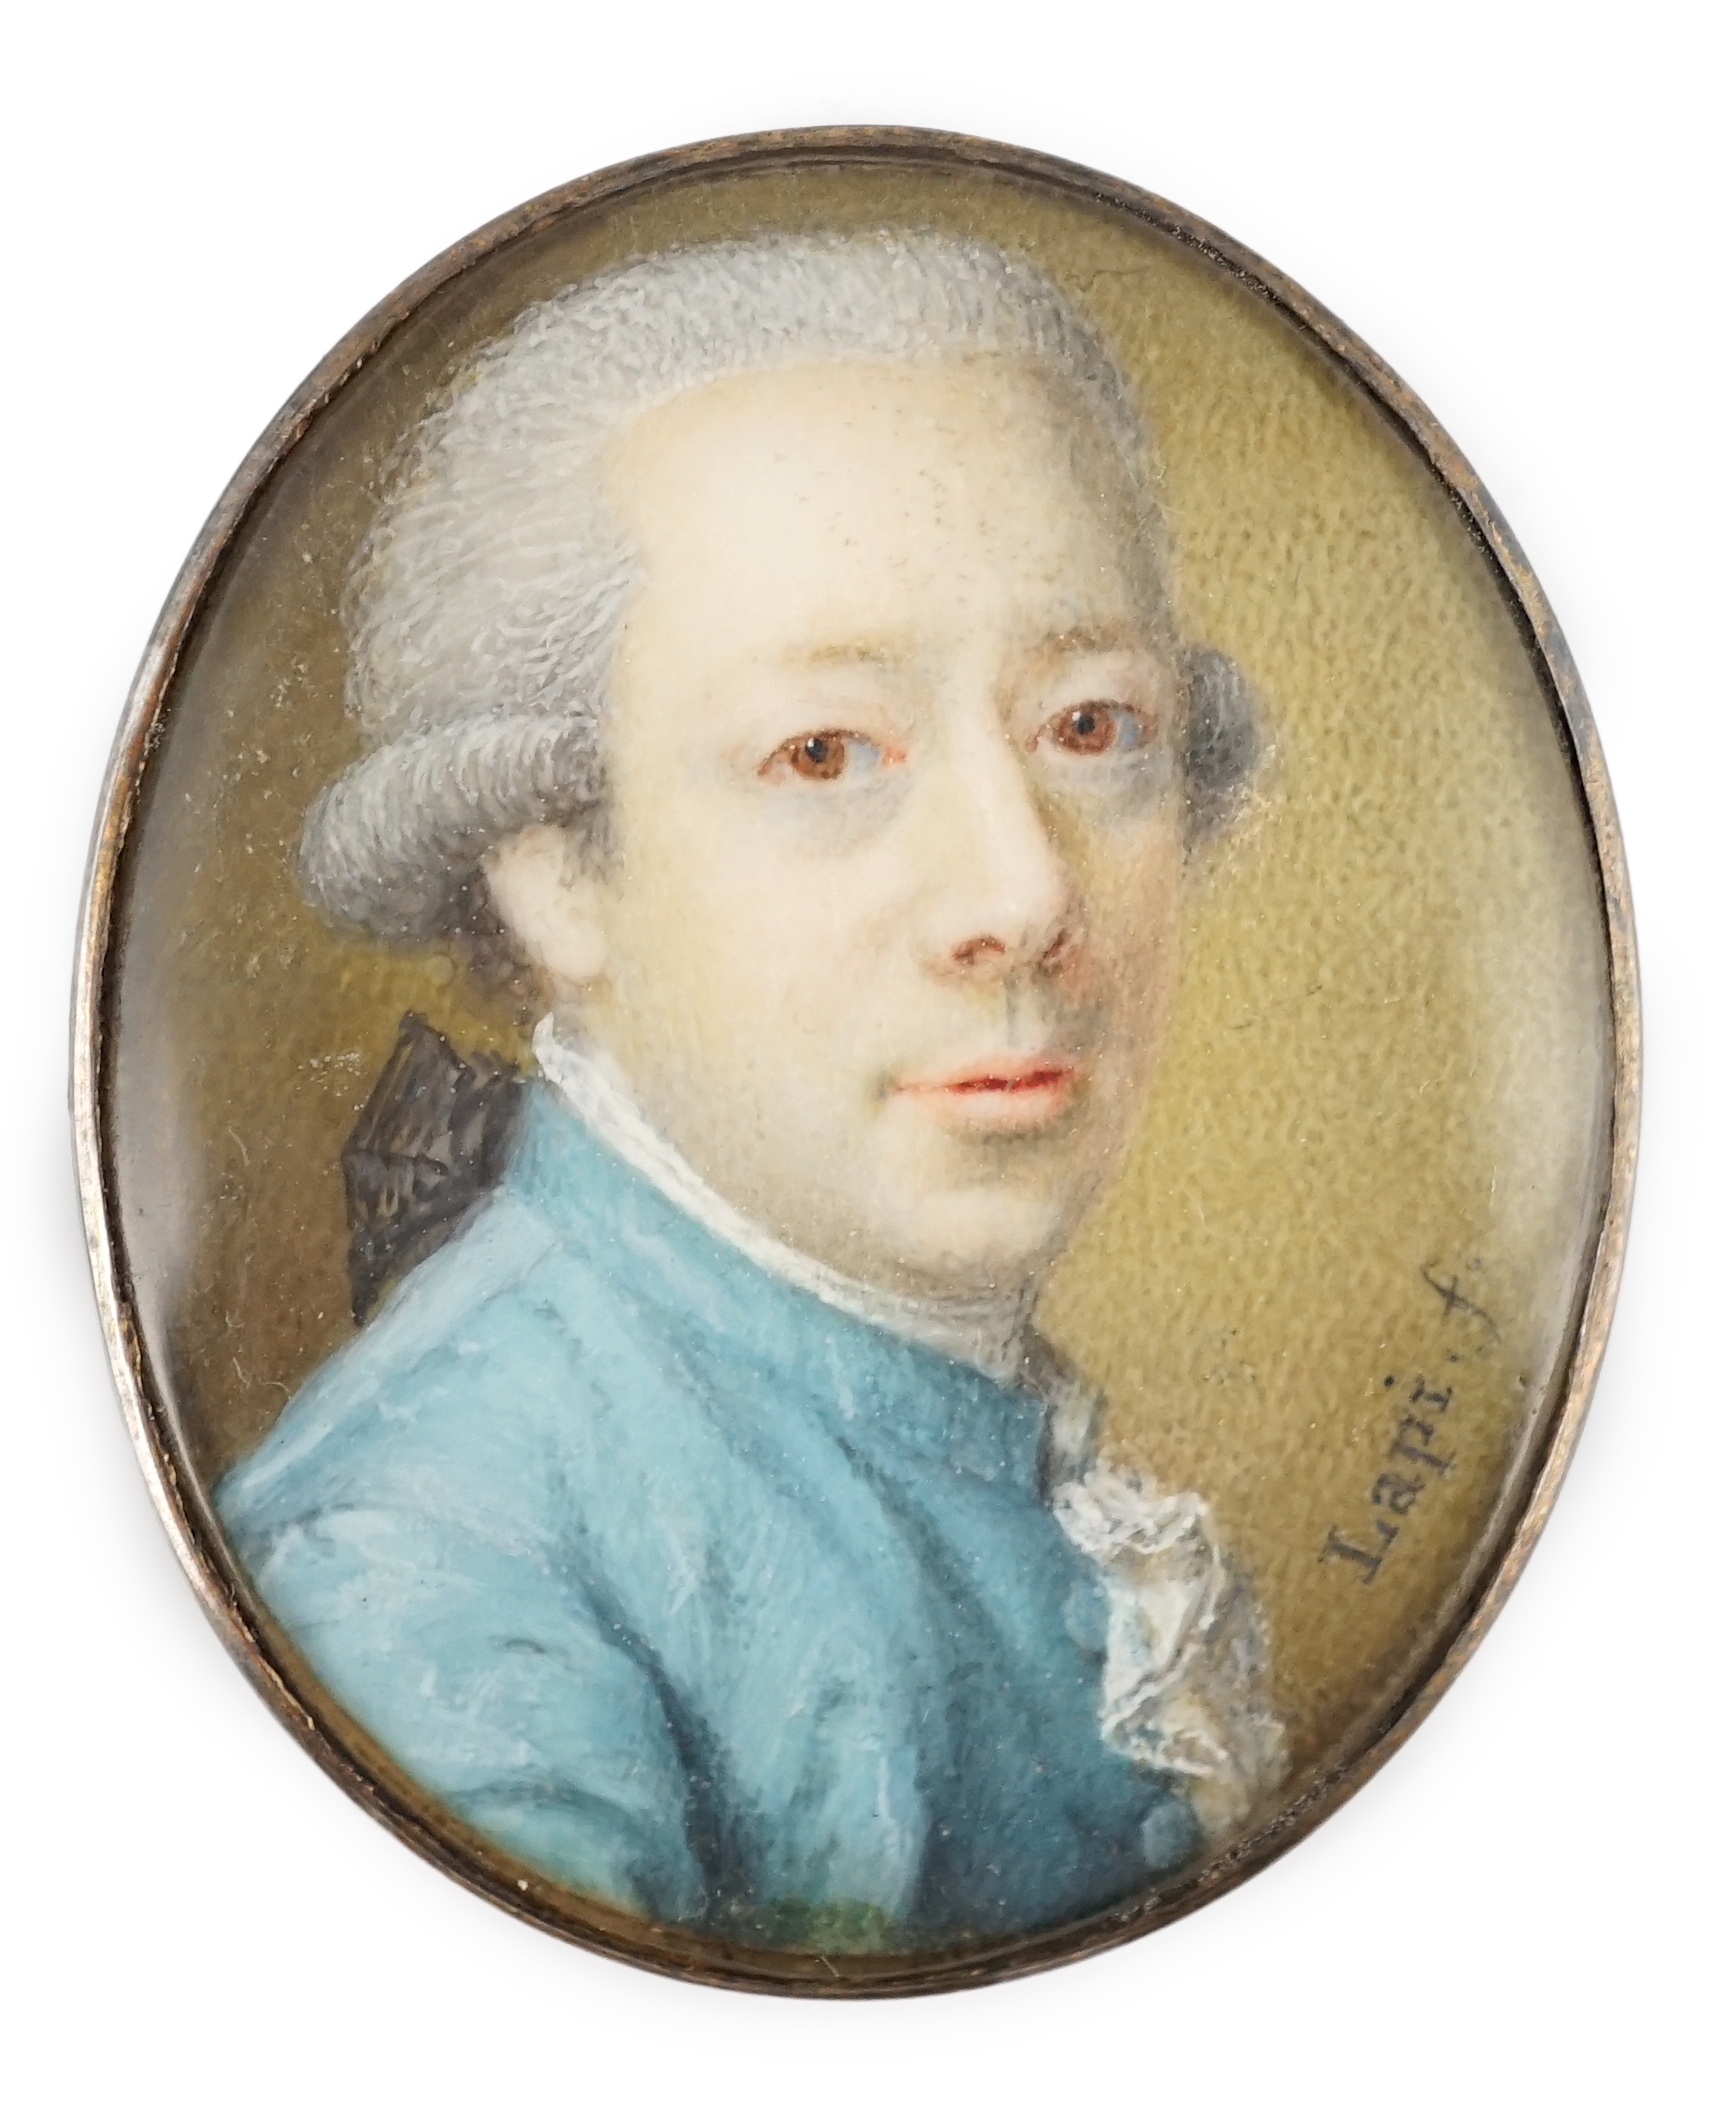 Lapi (circa 1775), Portrait miniature of a gentleman, oil on ivory, 3.5 x 2.8cm. CITES Submission reference WX9PFE22